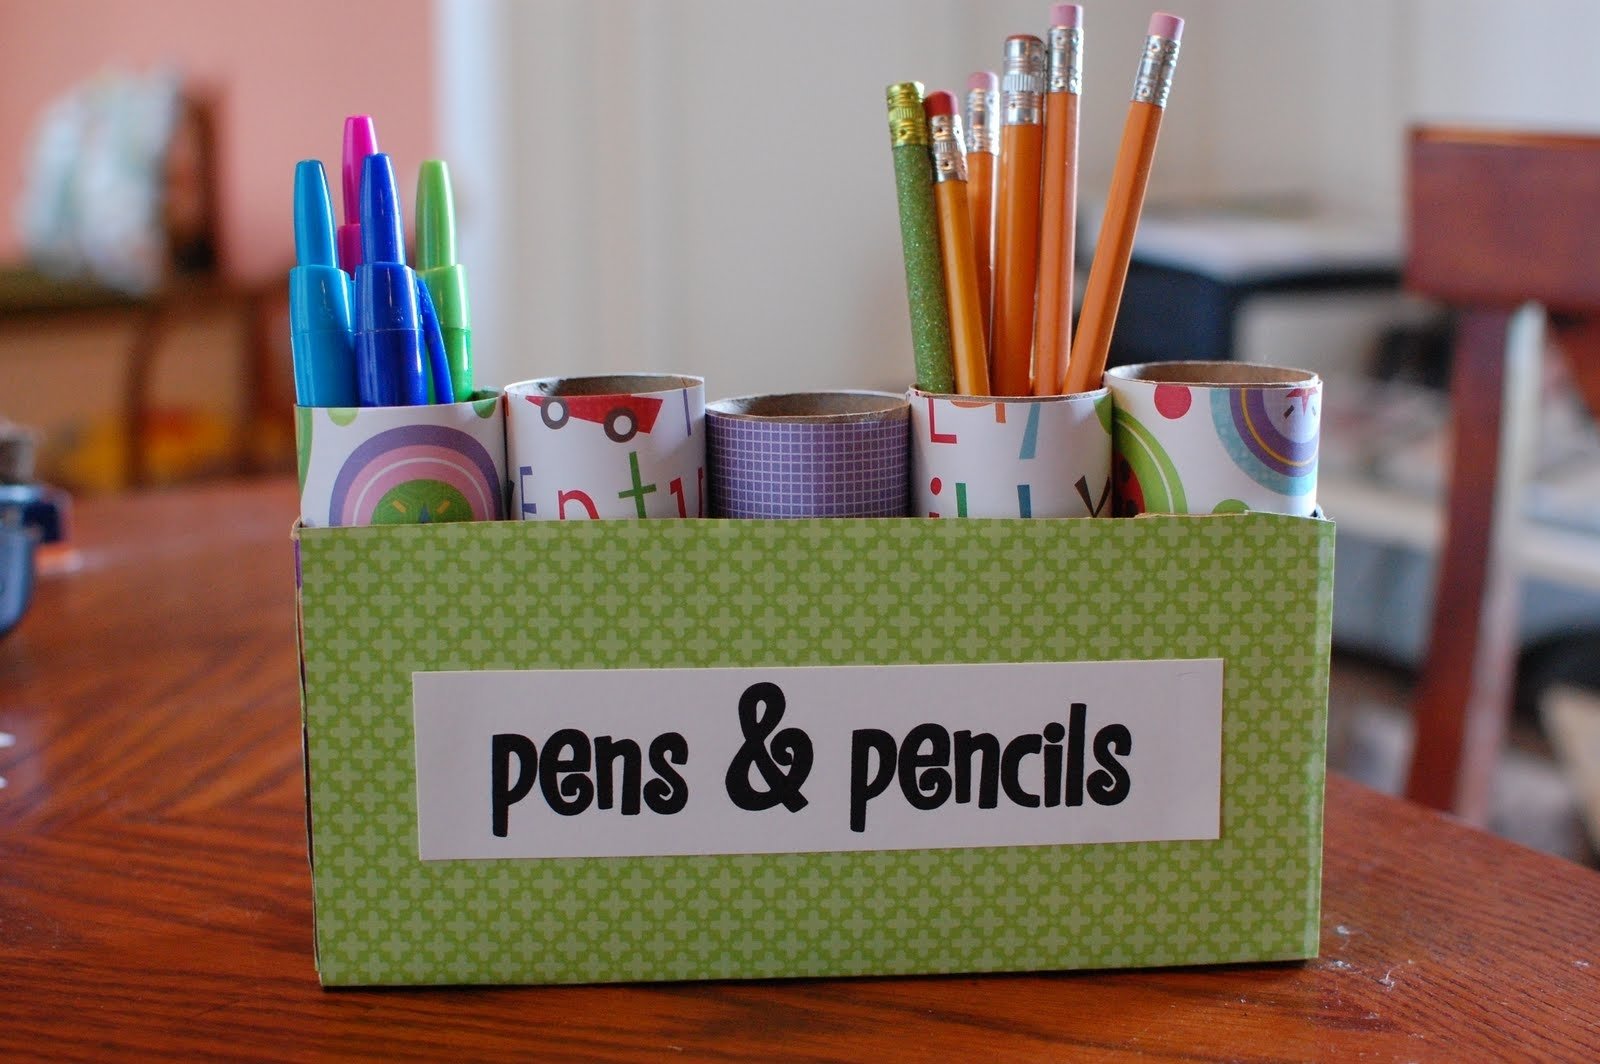 10 Awesome Recycled Projects For School Ideas recycle project ideas cute projects for kids pen and pencil caddy 2022